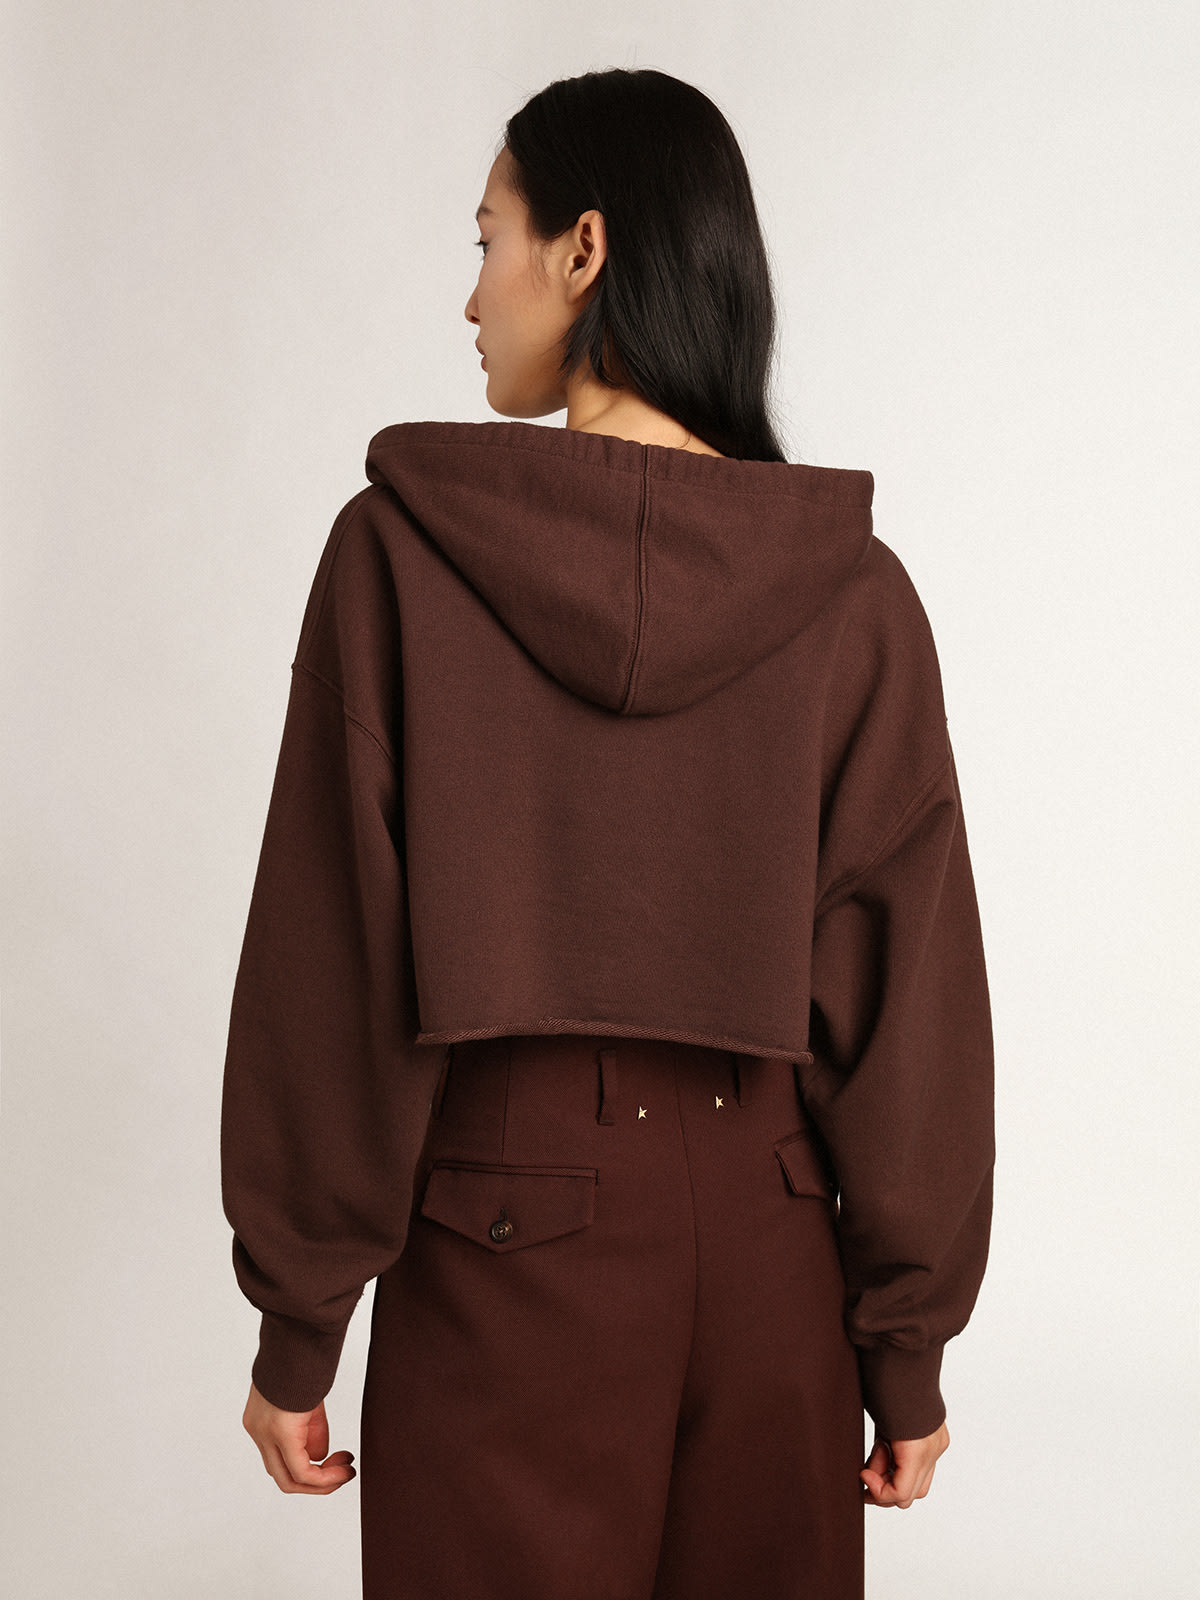 Golden Goose - Walnut-brown Journey Collection hooded cropped sweatshirt with contrasting white Golden lettering in 